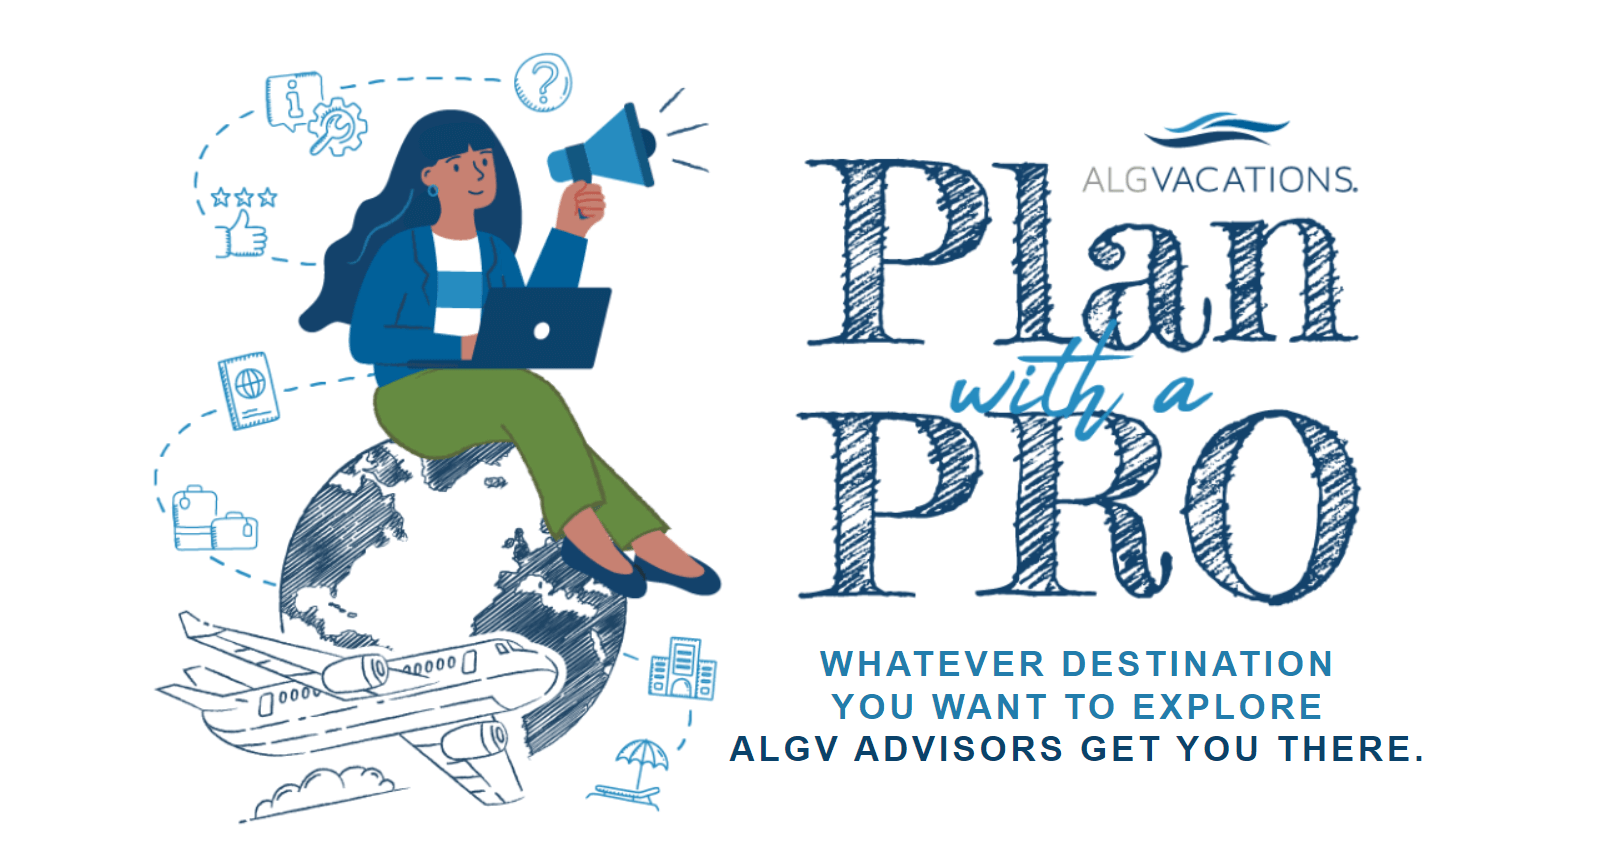 ALG Vacations Plan with a Pro 